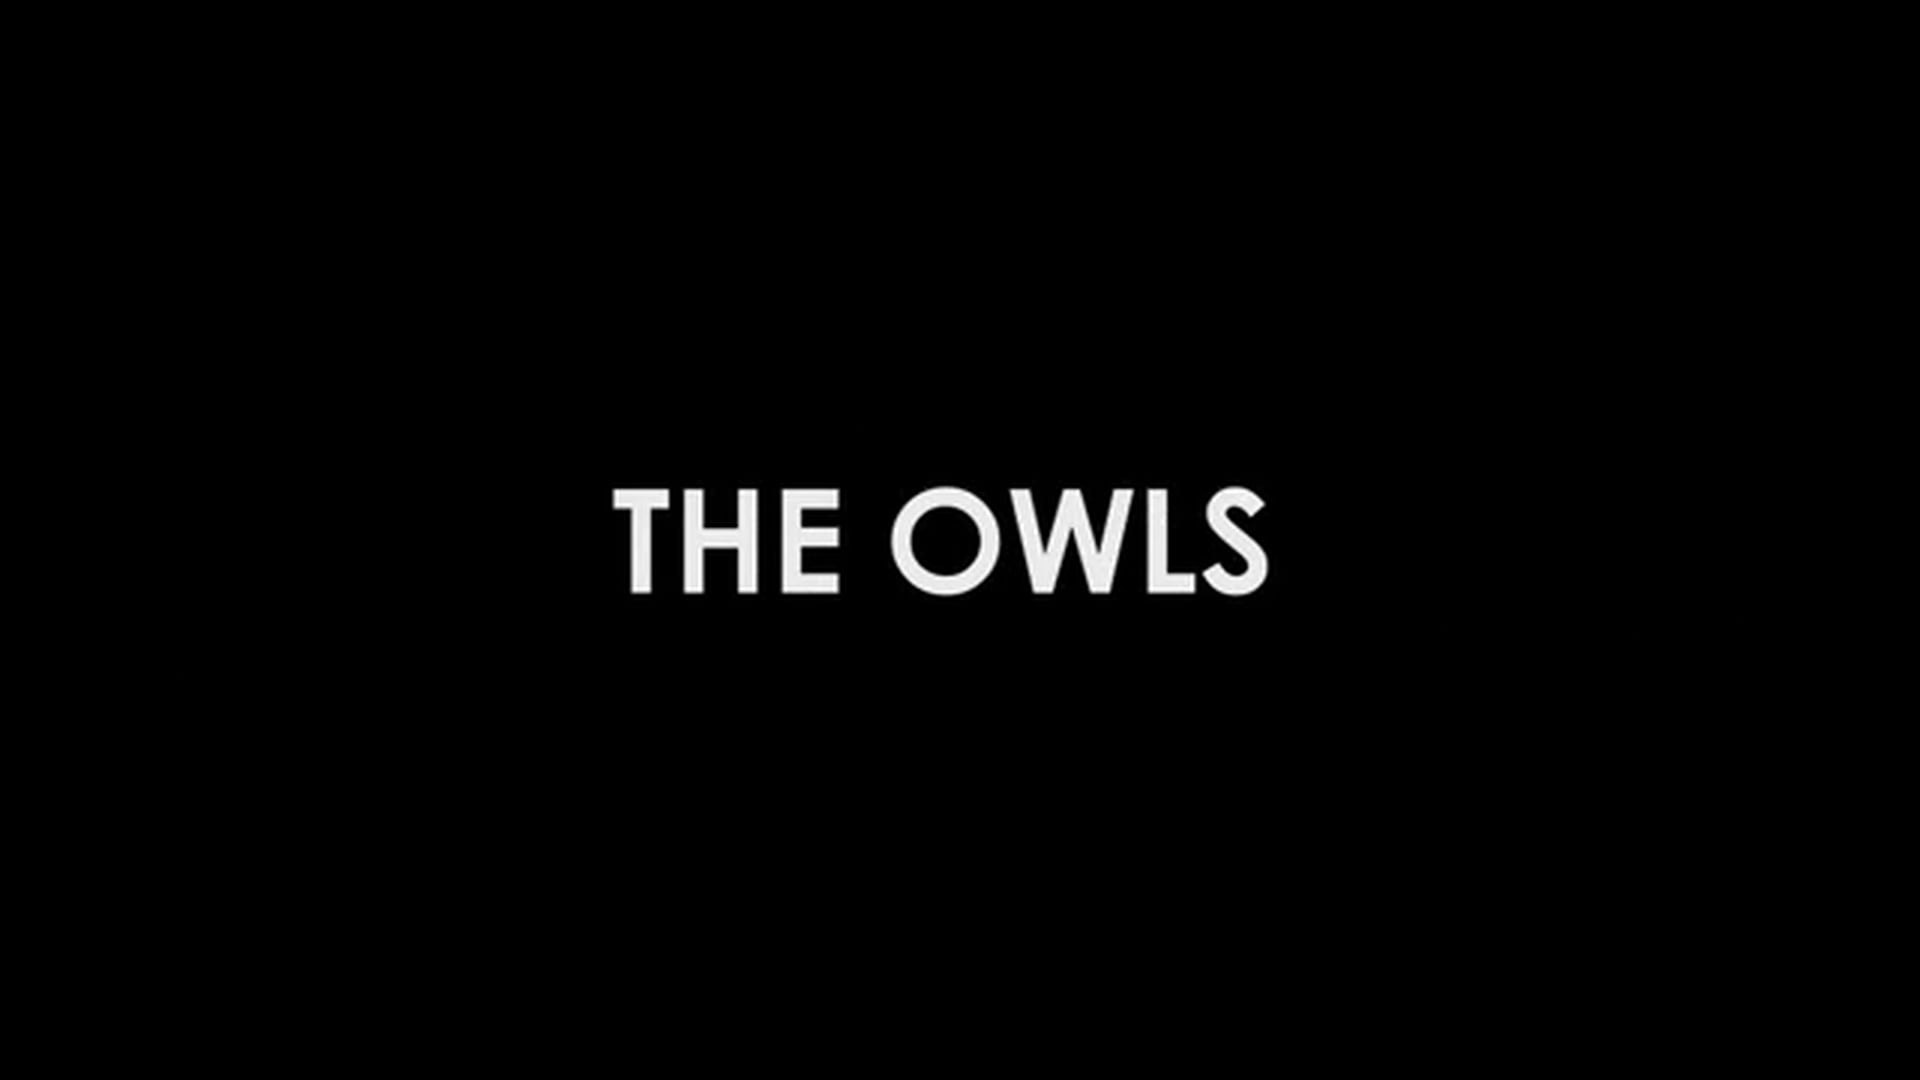 The Owls (2010) - Final Edited Master Trailer_H264.mov